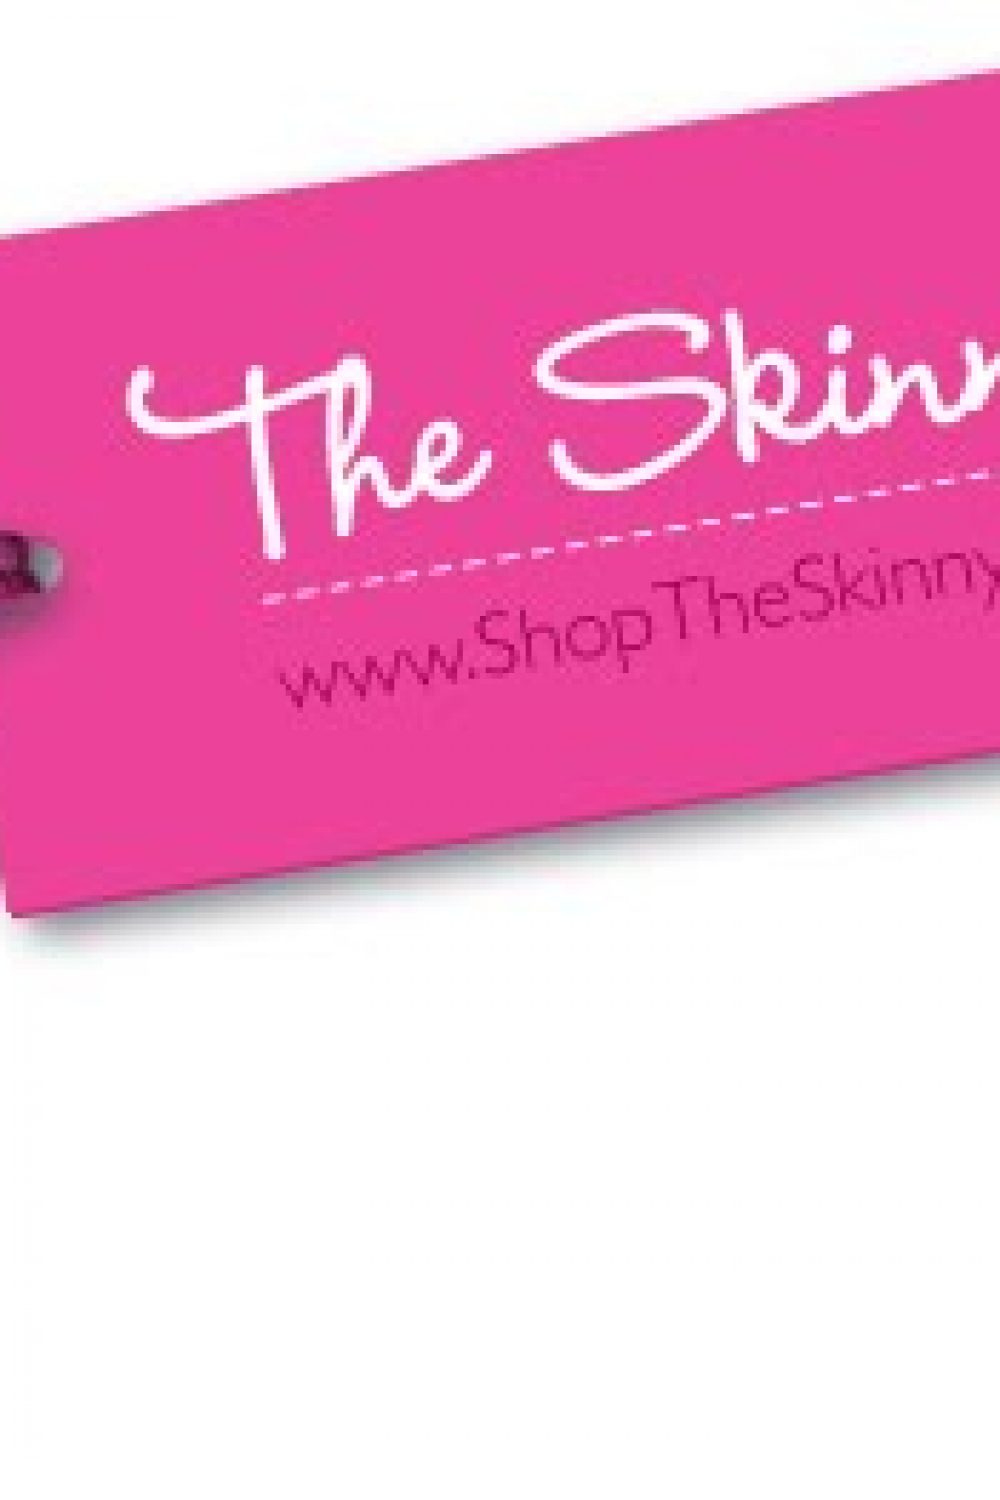 The Skinny Launches Tomorrow!